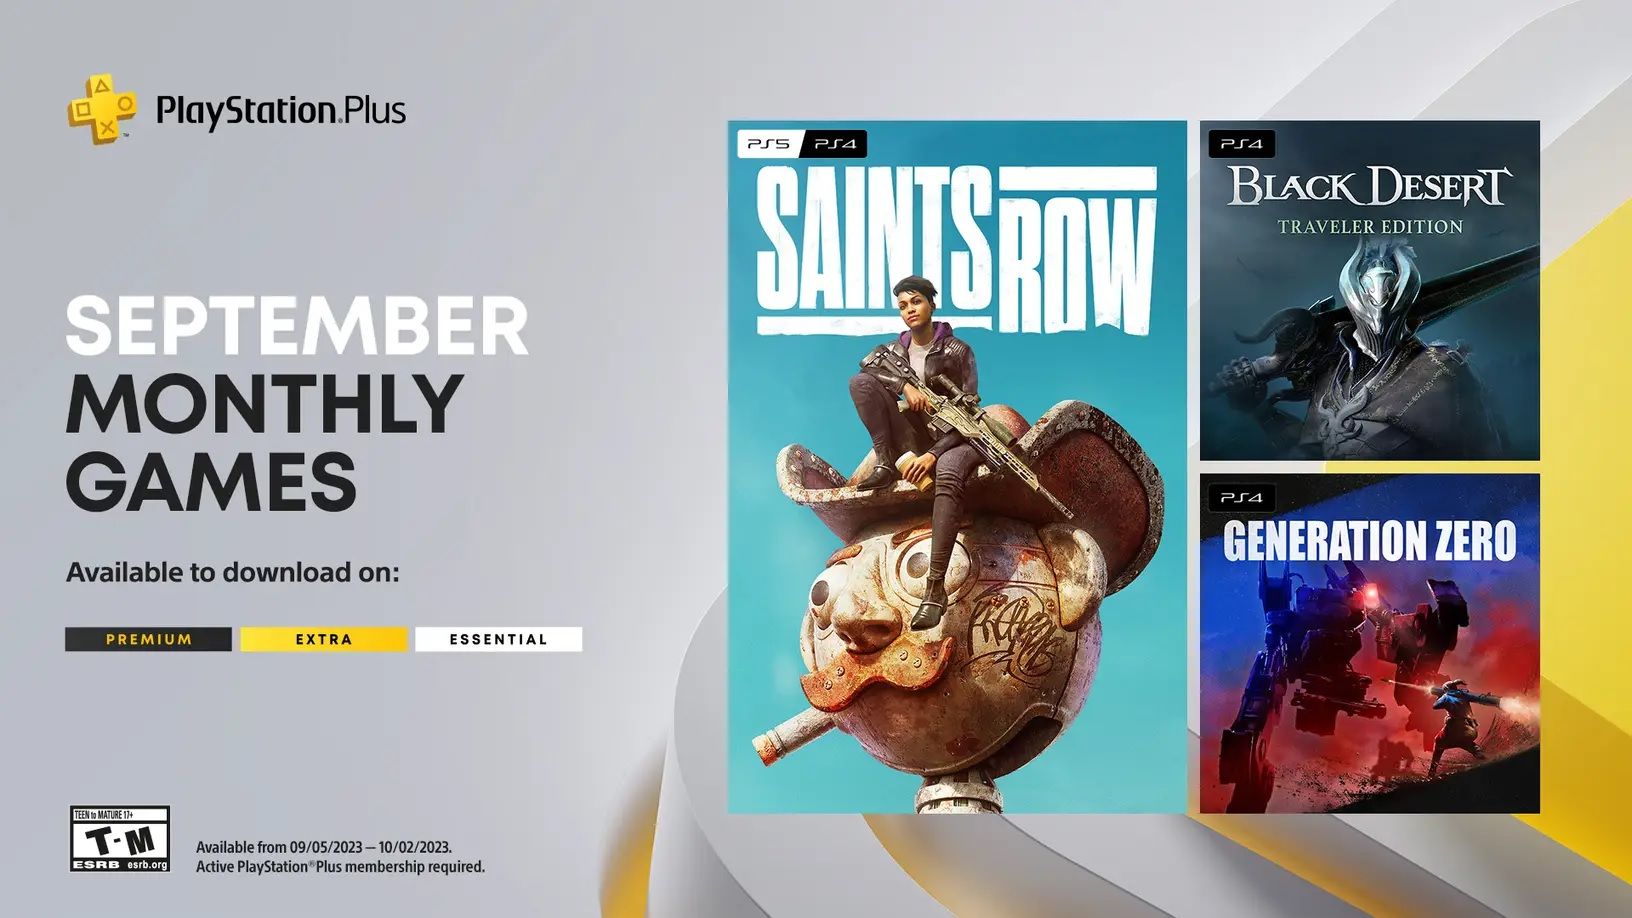 PS Plus Free Games for September 2023 Break From a Typical Sony Pattern